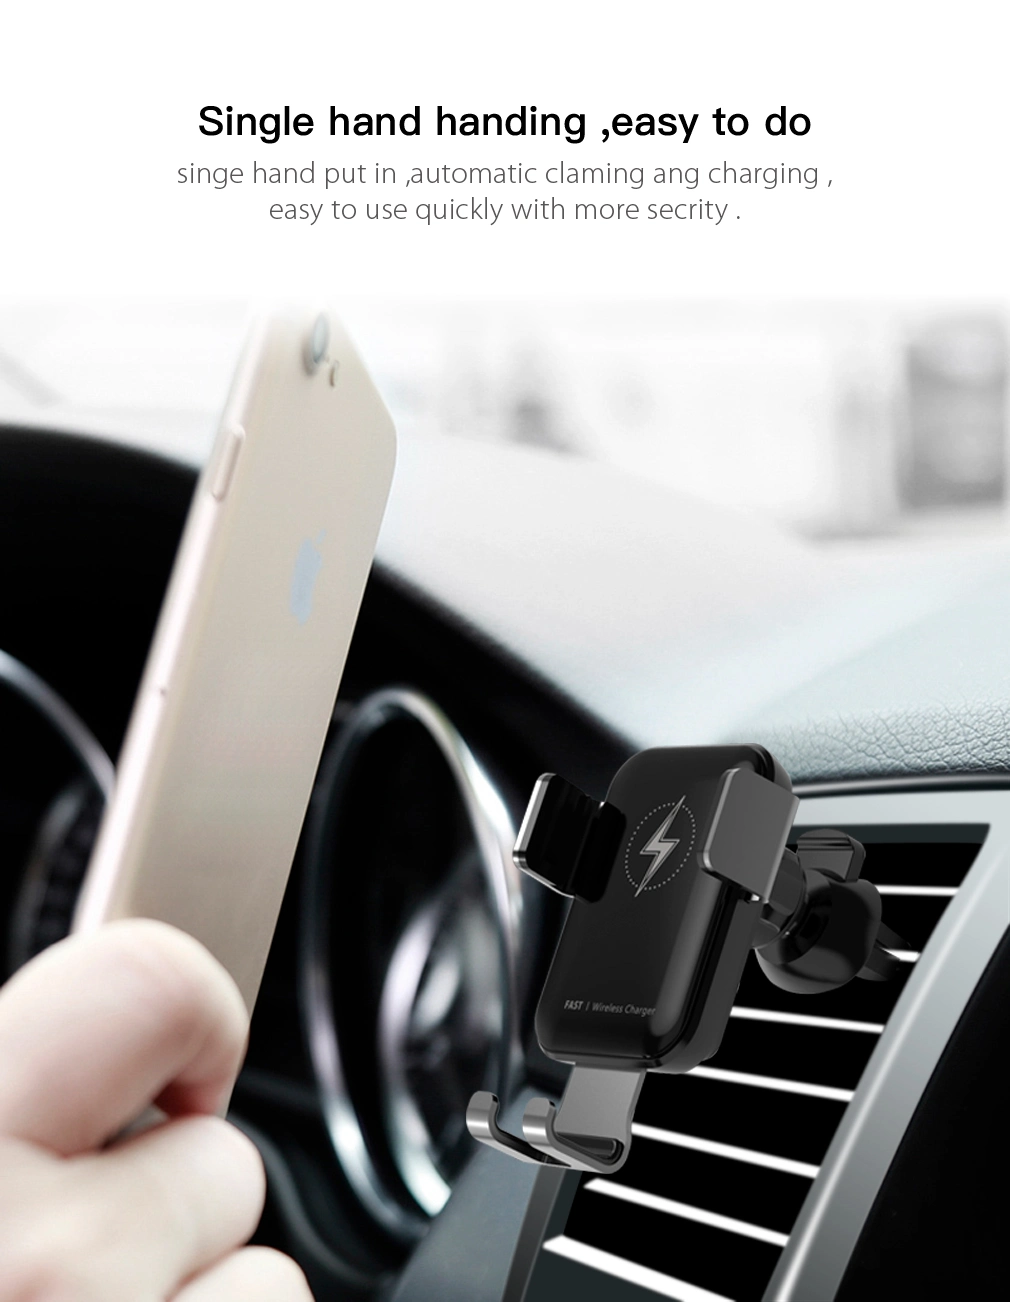 Wireless Charger in Car Charger 15W Qi Wireless Charger Car Auto Clamping Best Wireless Car Charger